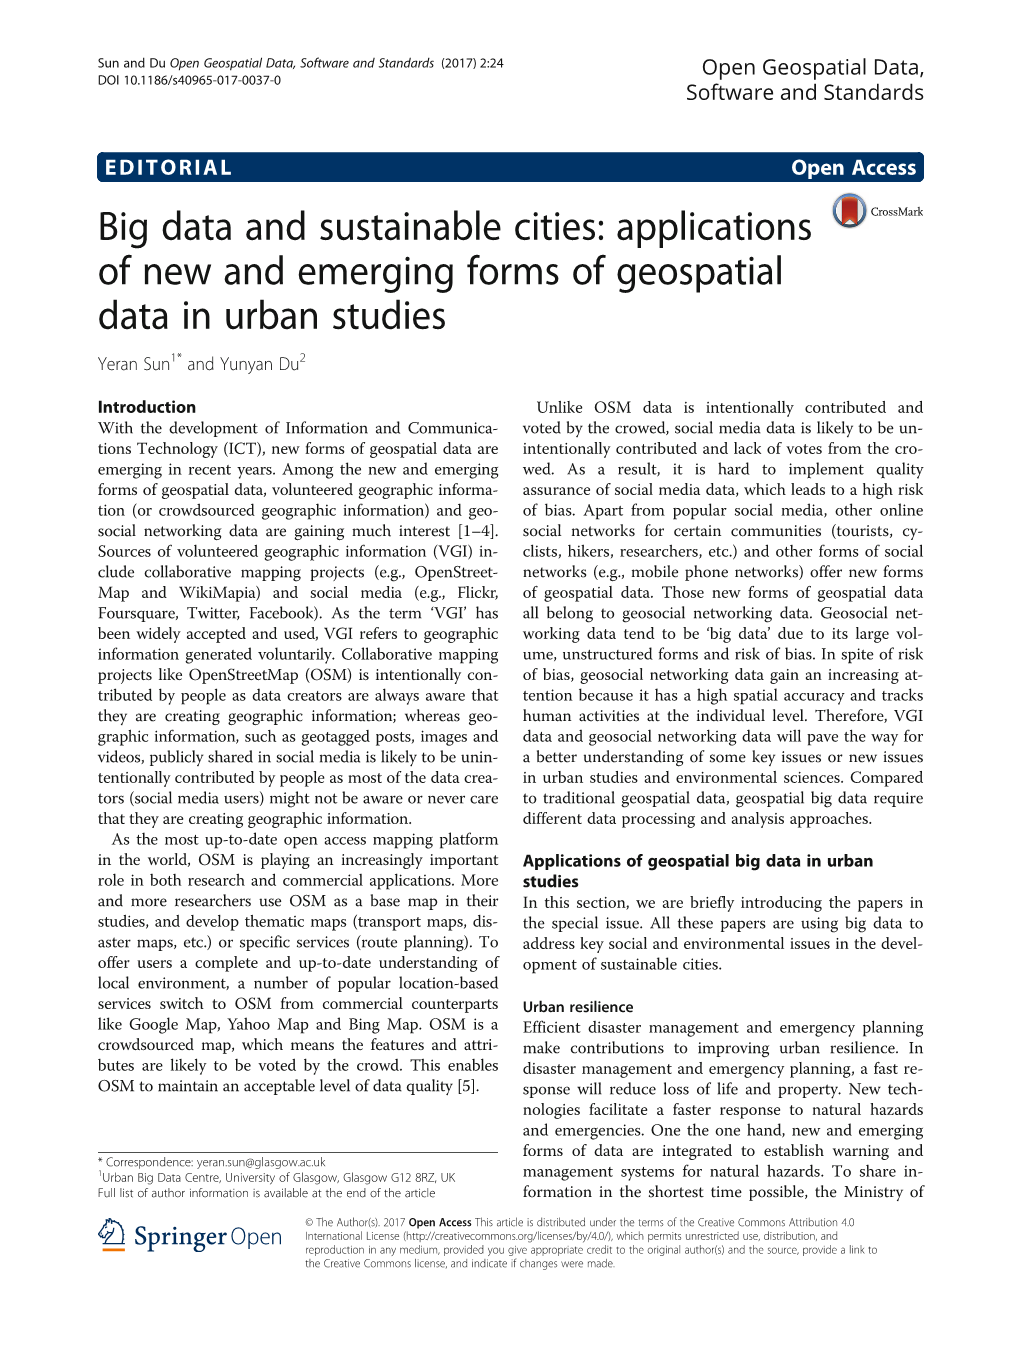 Big Data and Sustainable Cities: Applications of New and Emerging Forms of Geospatial Data in Urban Studies Yeran Sun1* and Yunyan Du2